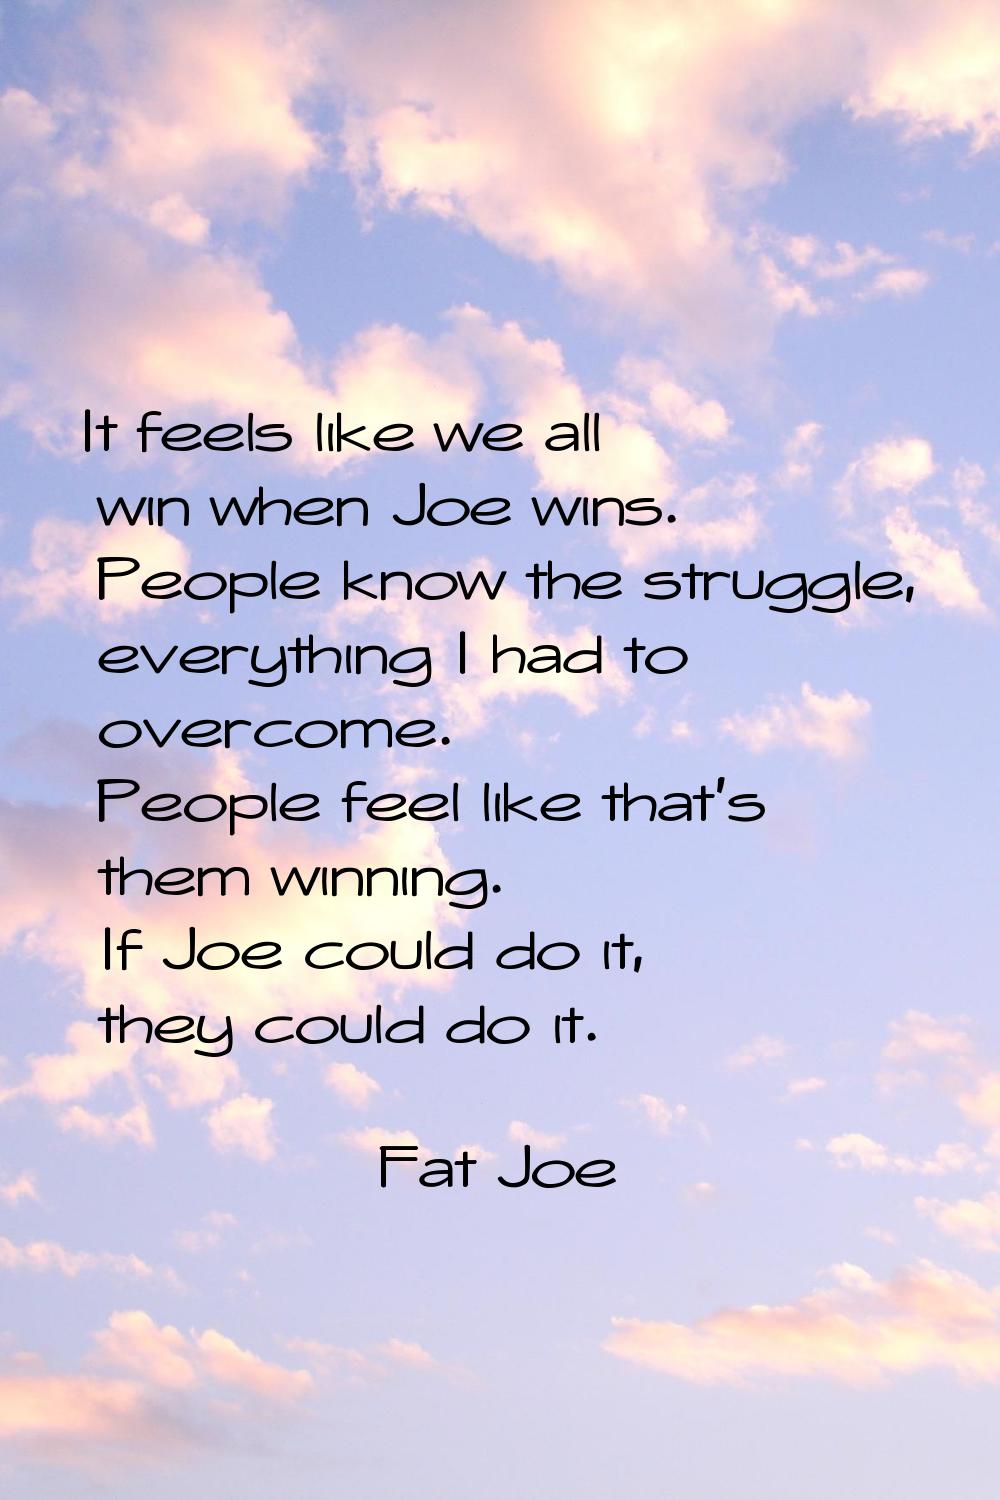 It feels like we all win when Joe wins. People know the struggle, everything I had to overcome. Peo